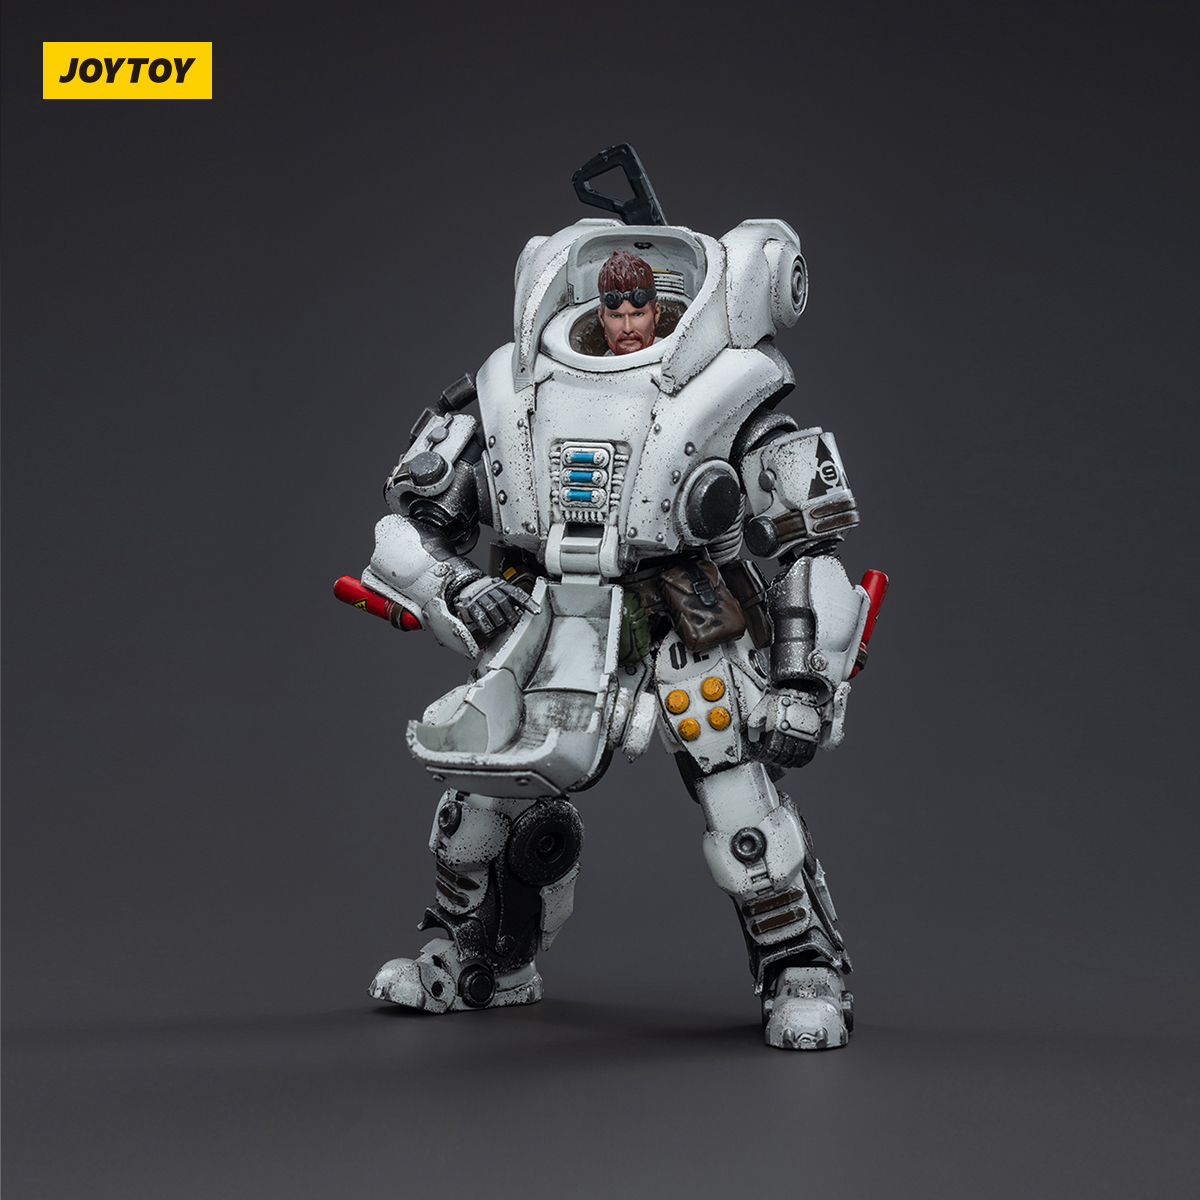 JOYTOY JT3303 1:18 Sorrow Expeditionary Forces-9th Army of the 